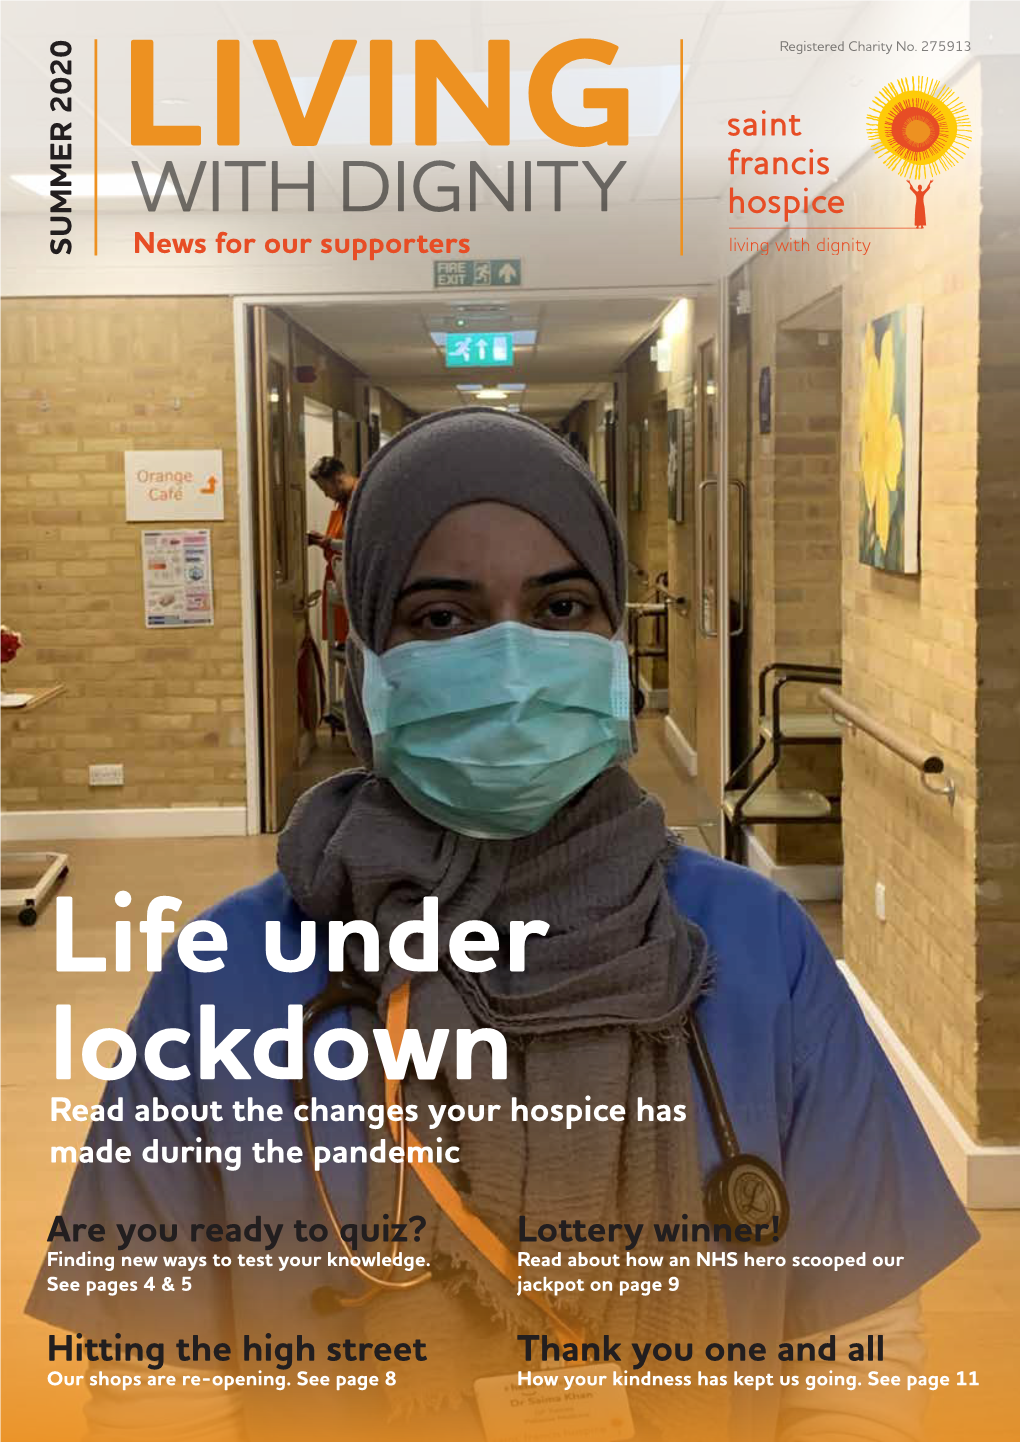 Life Under Lockdown Read About the Changes Your Hospice Has Made During the Pandemic